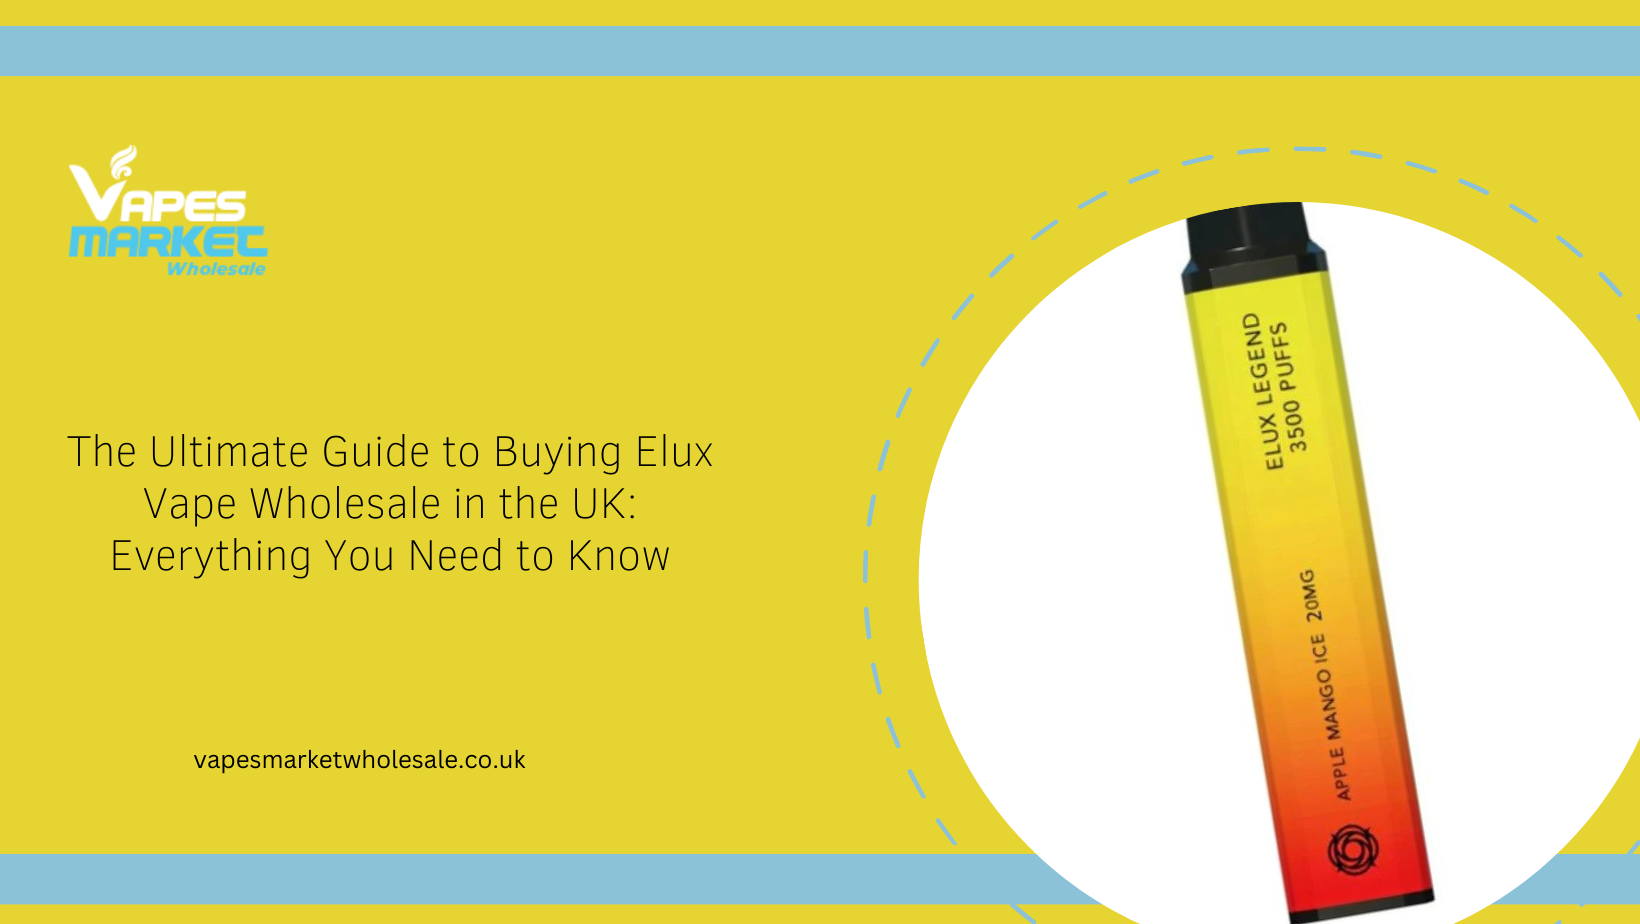 The Ultimate Guide to Buying Elux Vape Wholesale in the UK